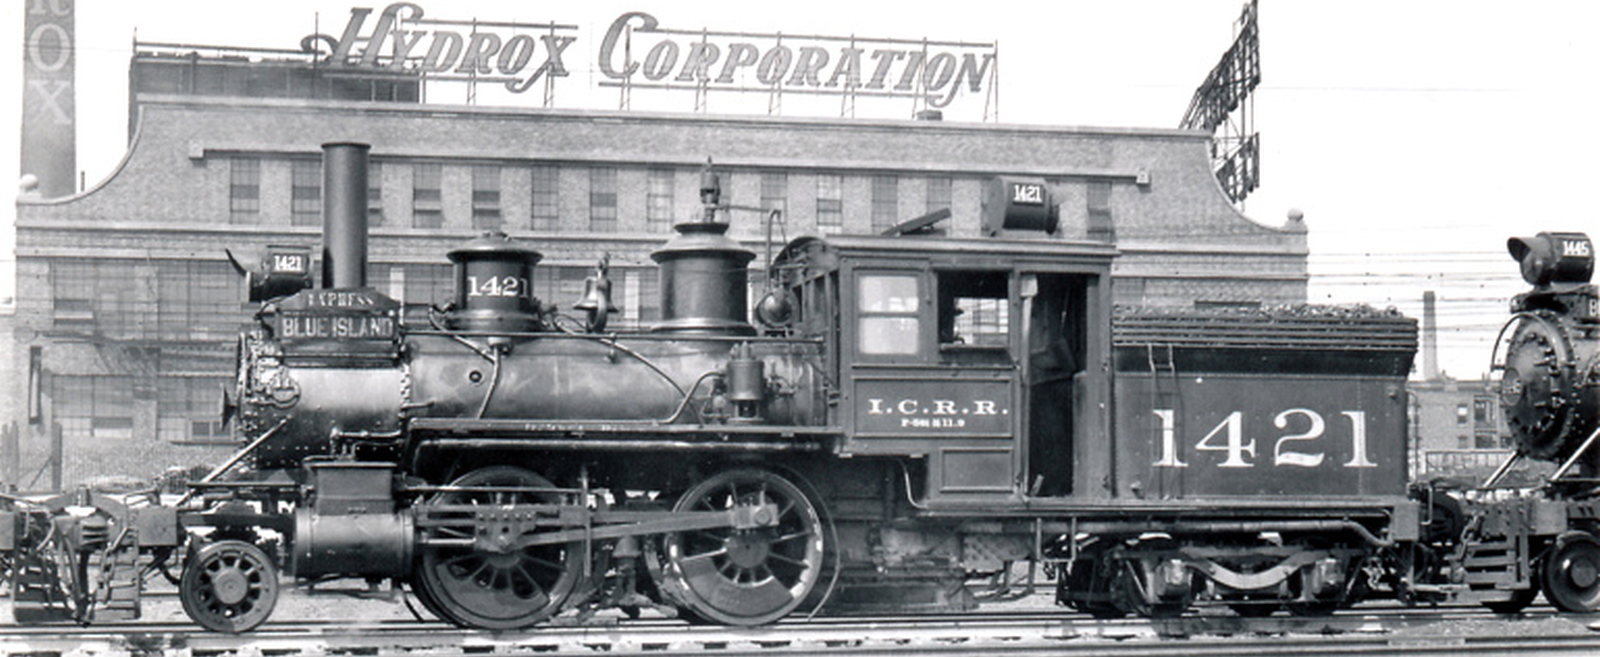 No. 1421 (Class 223/1409) in July 1926 at Chicago